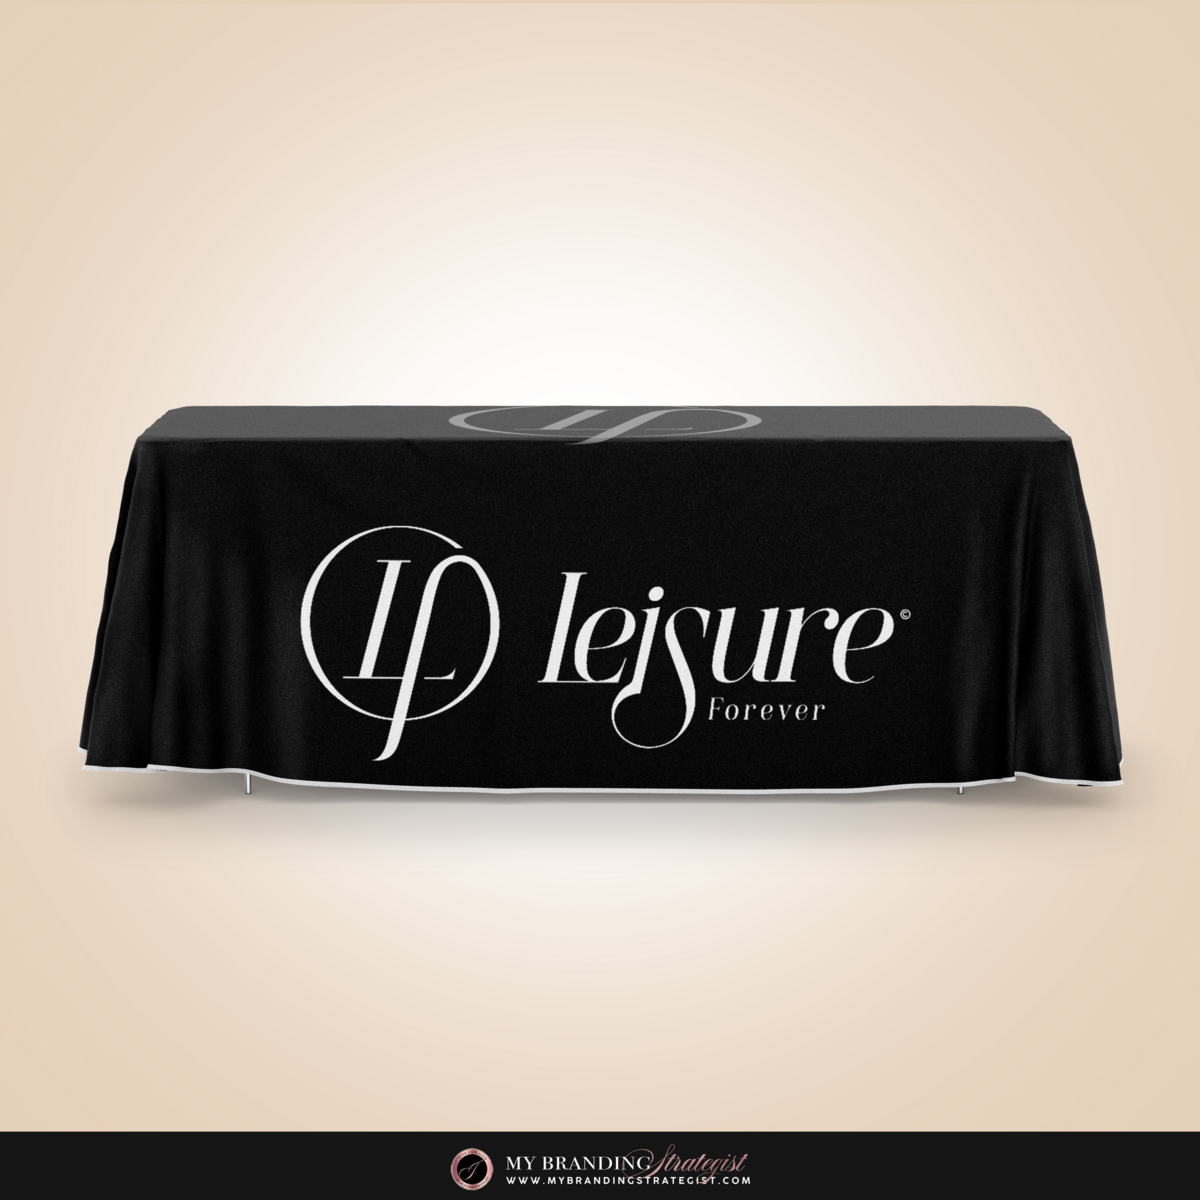 MOCKUP - TABLECLOTH - LEISURE FOREVER